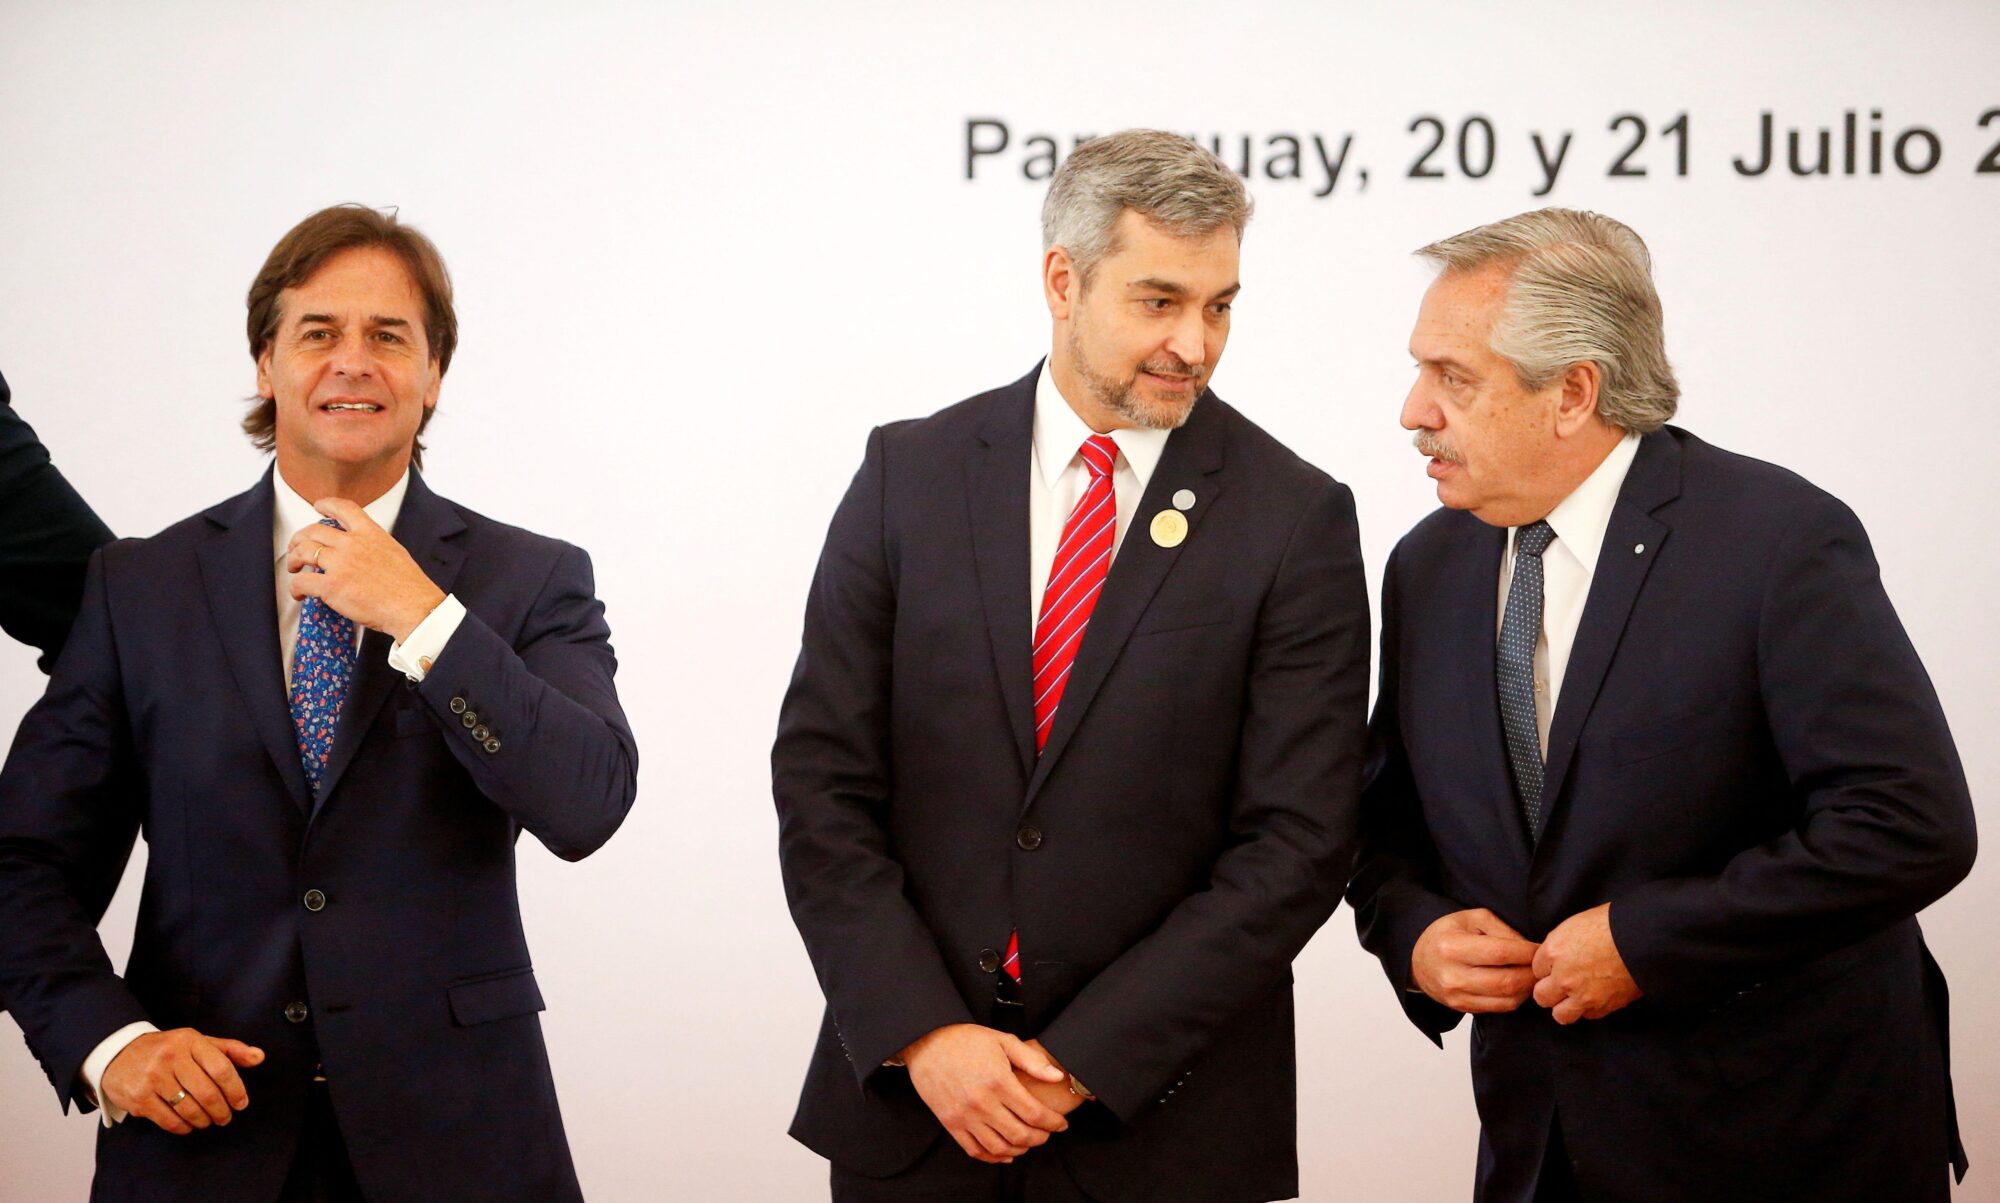 <p>Uruguay’s president Luis Lacalle Pou (left) at the Mercosur summit in Asunción, 21 July. His desire to seek a free trade deal with China has caused tensions, with Mario Abdo of Paraguay (centre) and Alberto Fernández of Argentina (right) calling for regional unity in response (Image: Cesar Olmedo / Alamy)</p>